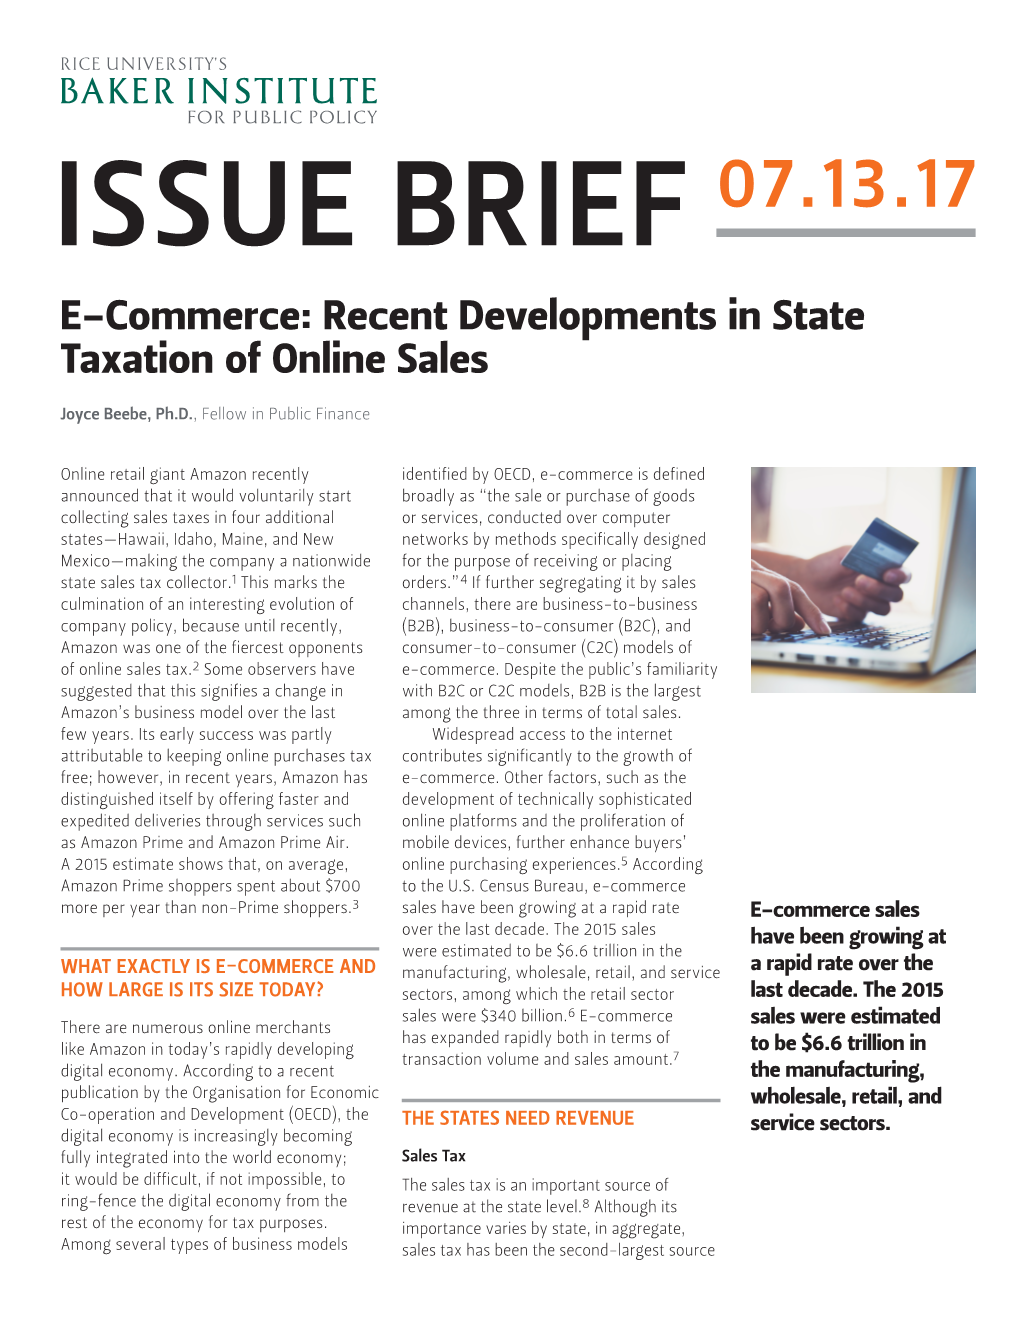 E-Commerce: Recent Developments in State Taxation of Online Sales